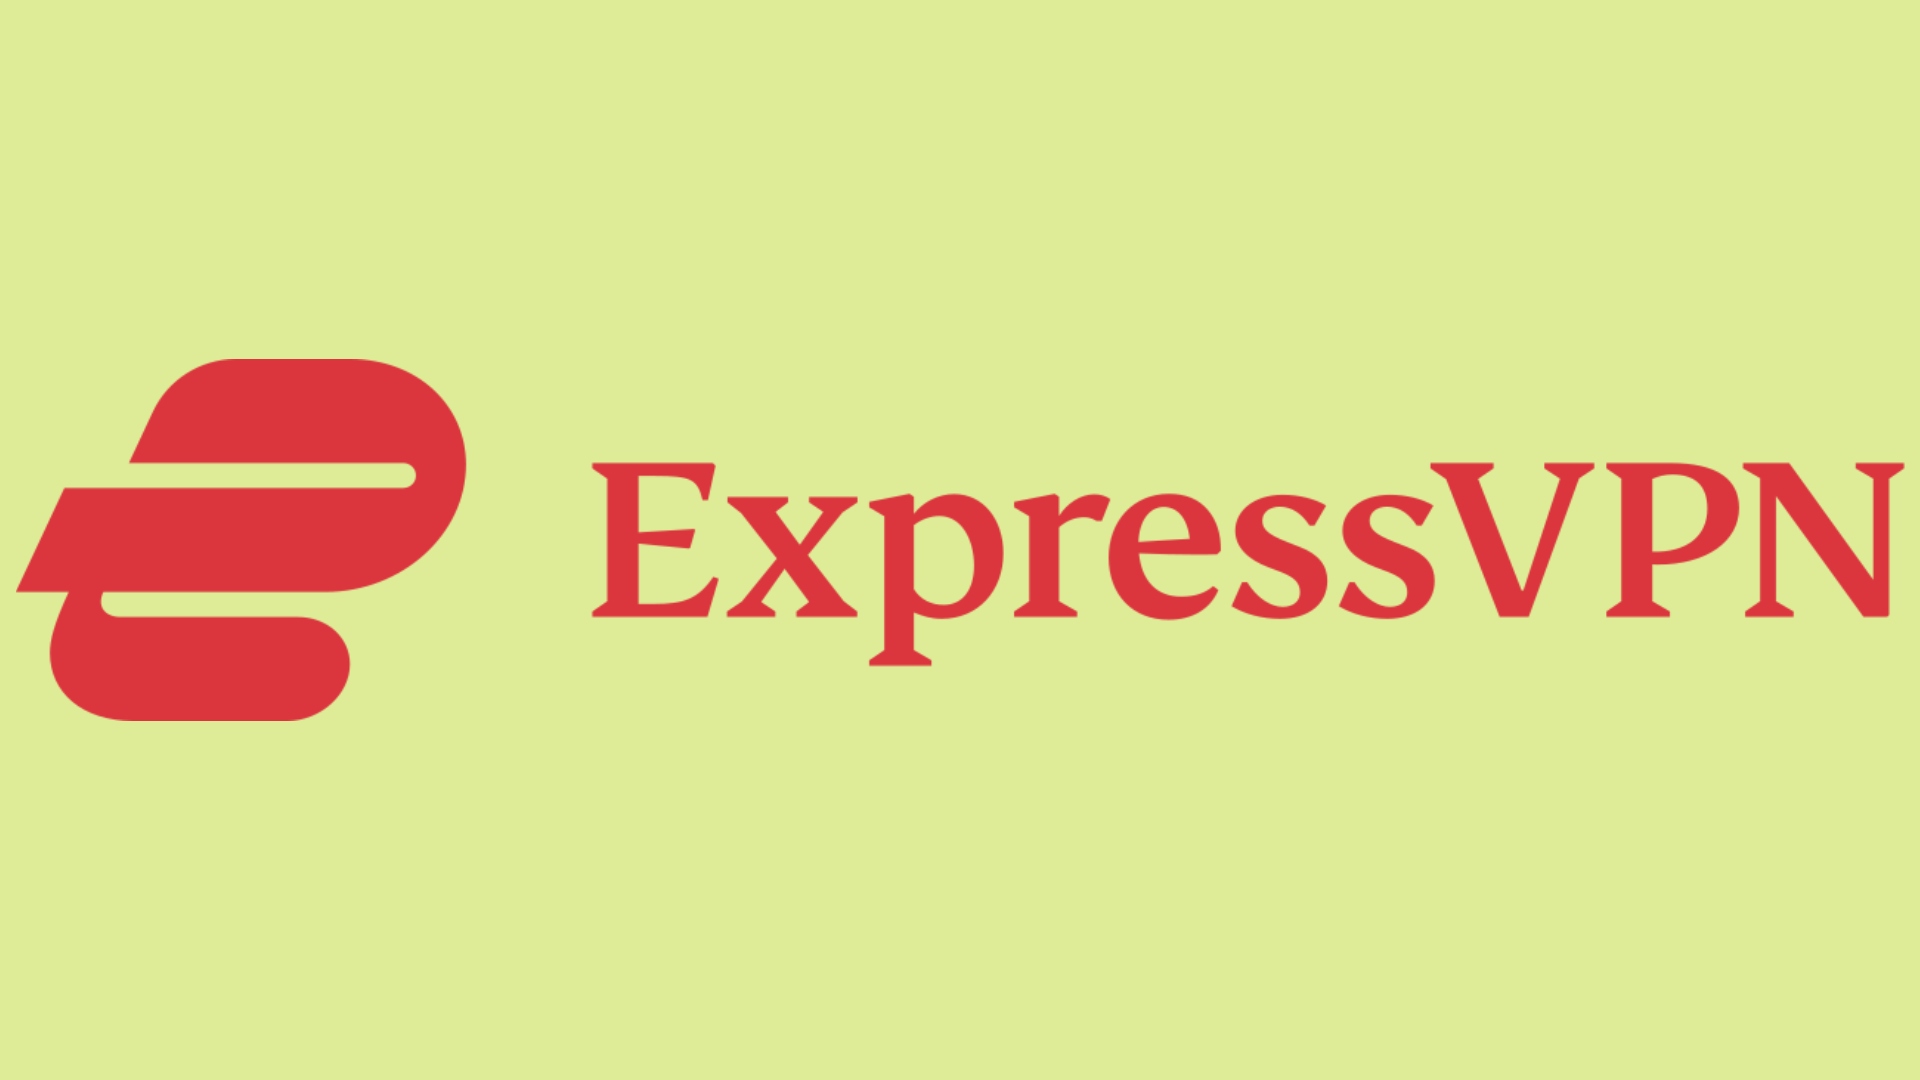 Best VPN for Xbox - ExpressVPN. Image shows the company's logo.